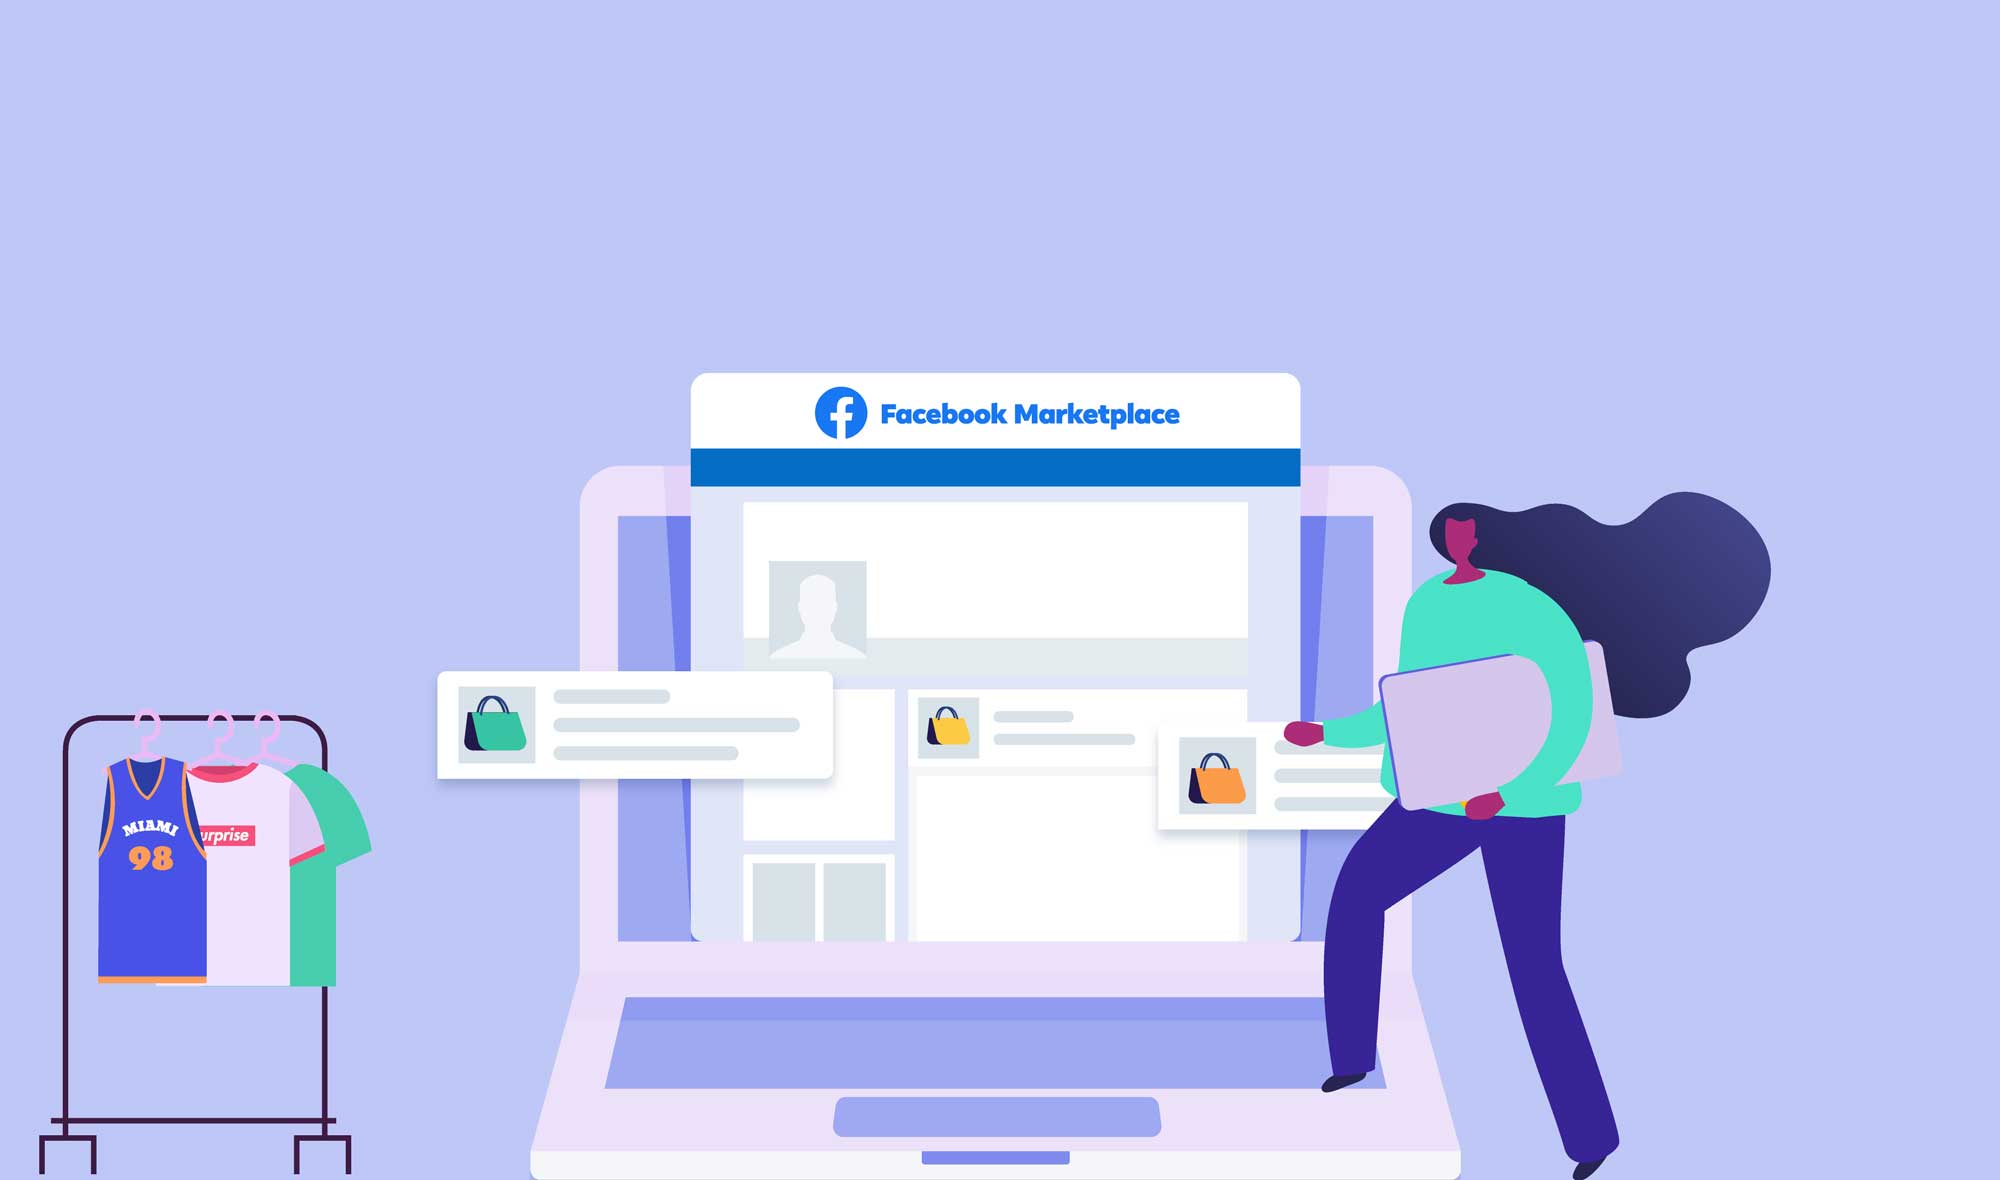 A Reseller’s Guide: How to Post, Ship & Start Selling on Facebook Marketplace